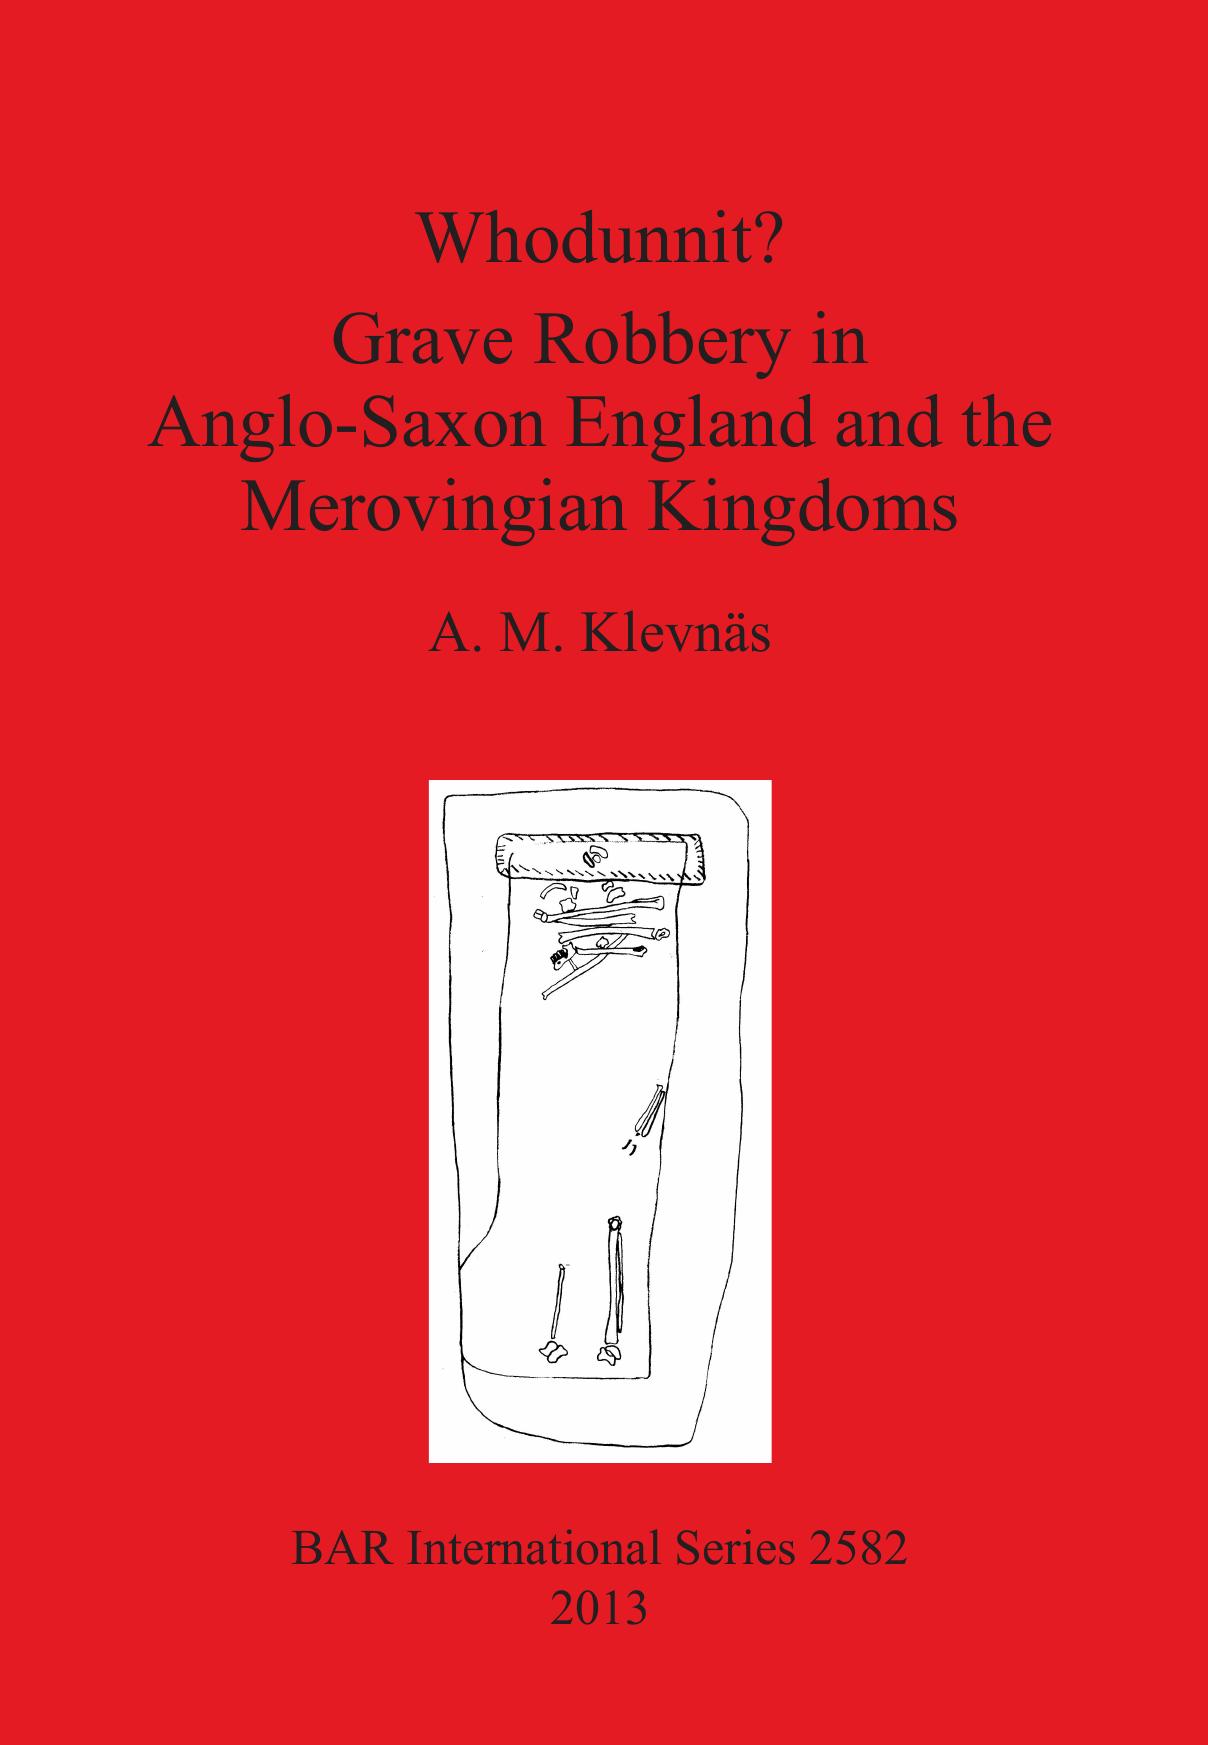 Whodunnit?: Grave Robbery in Anglo-Saxon England and the Merovingian Kingdoms